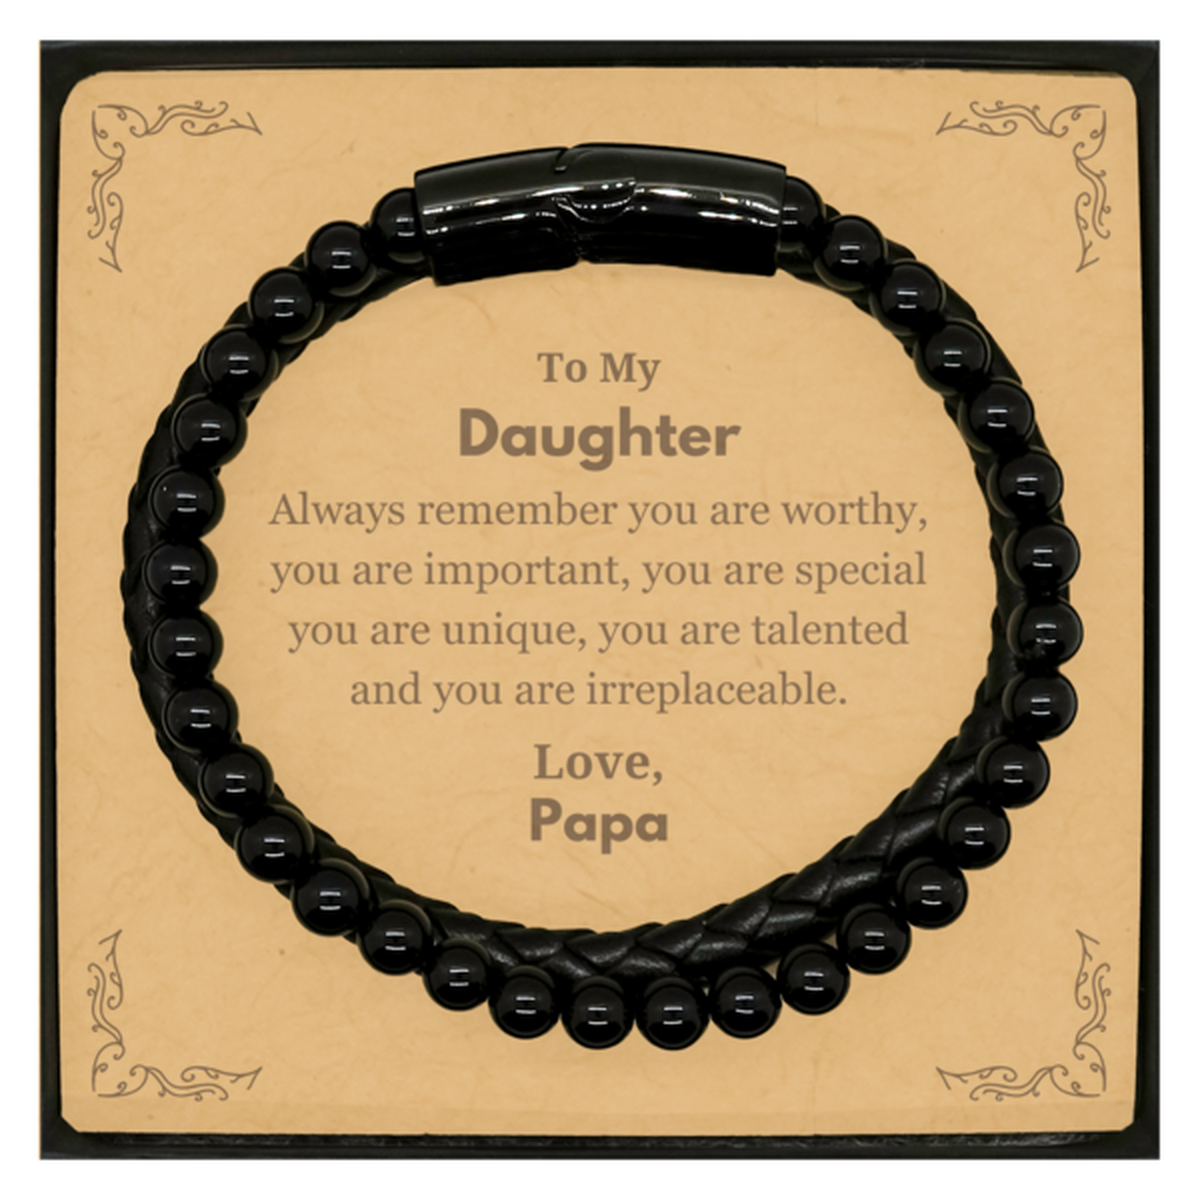 Daughter Birthday Gifts from Papa, Inspirational Stone Leather Bracelets for Daughter Christmas Graduation Gifts for Daughter Always remember you are worthy, you are important. Love, Papa